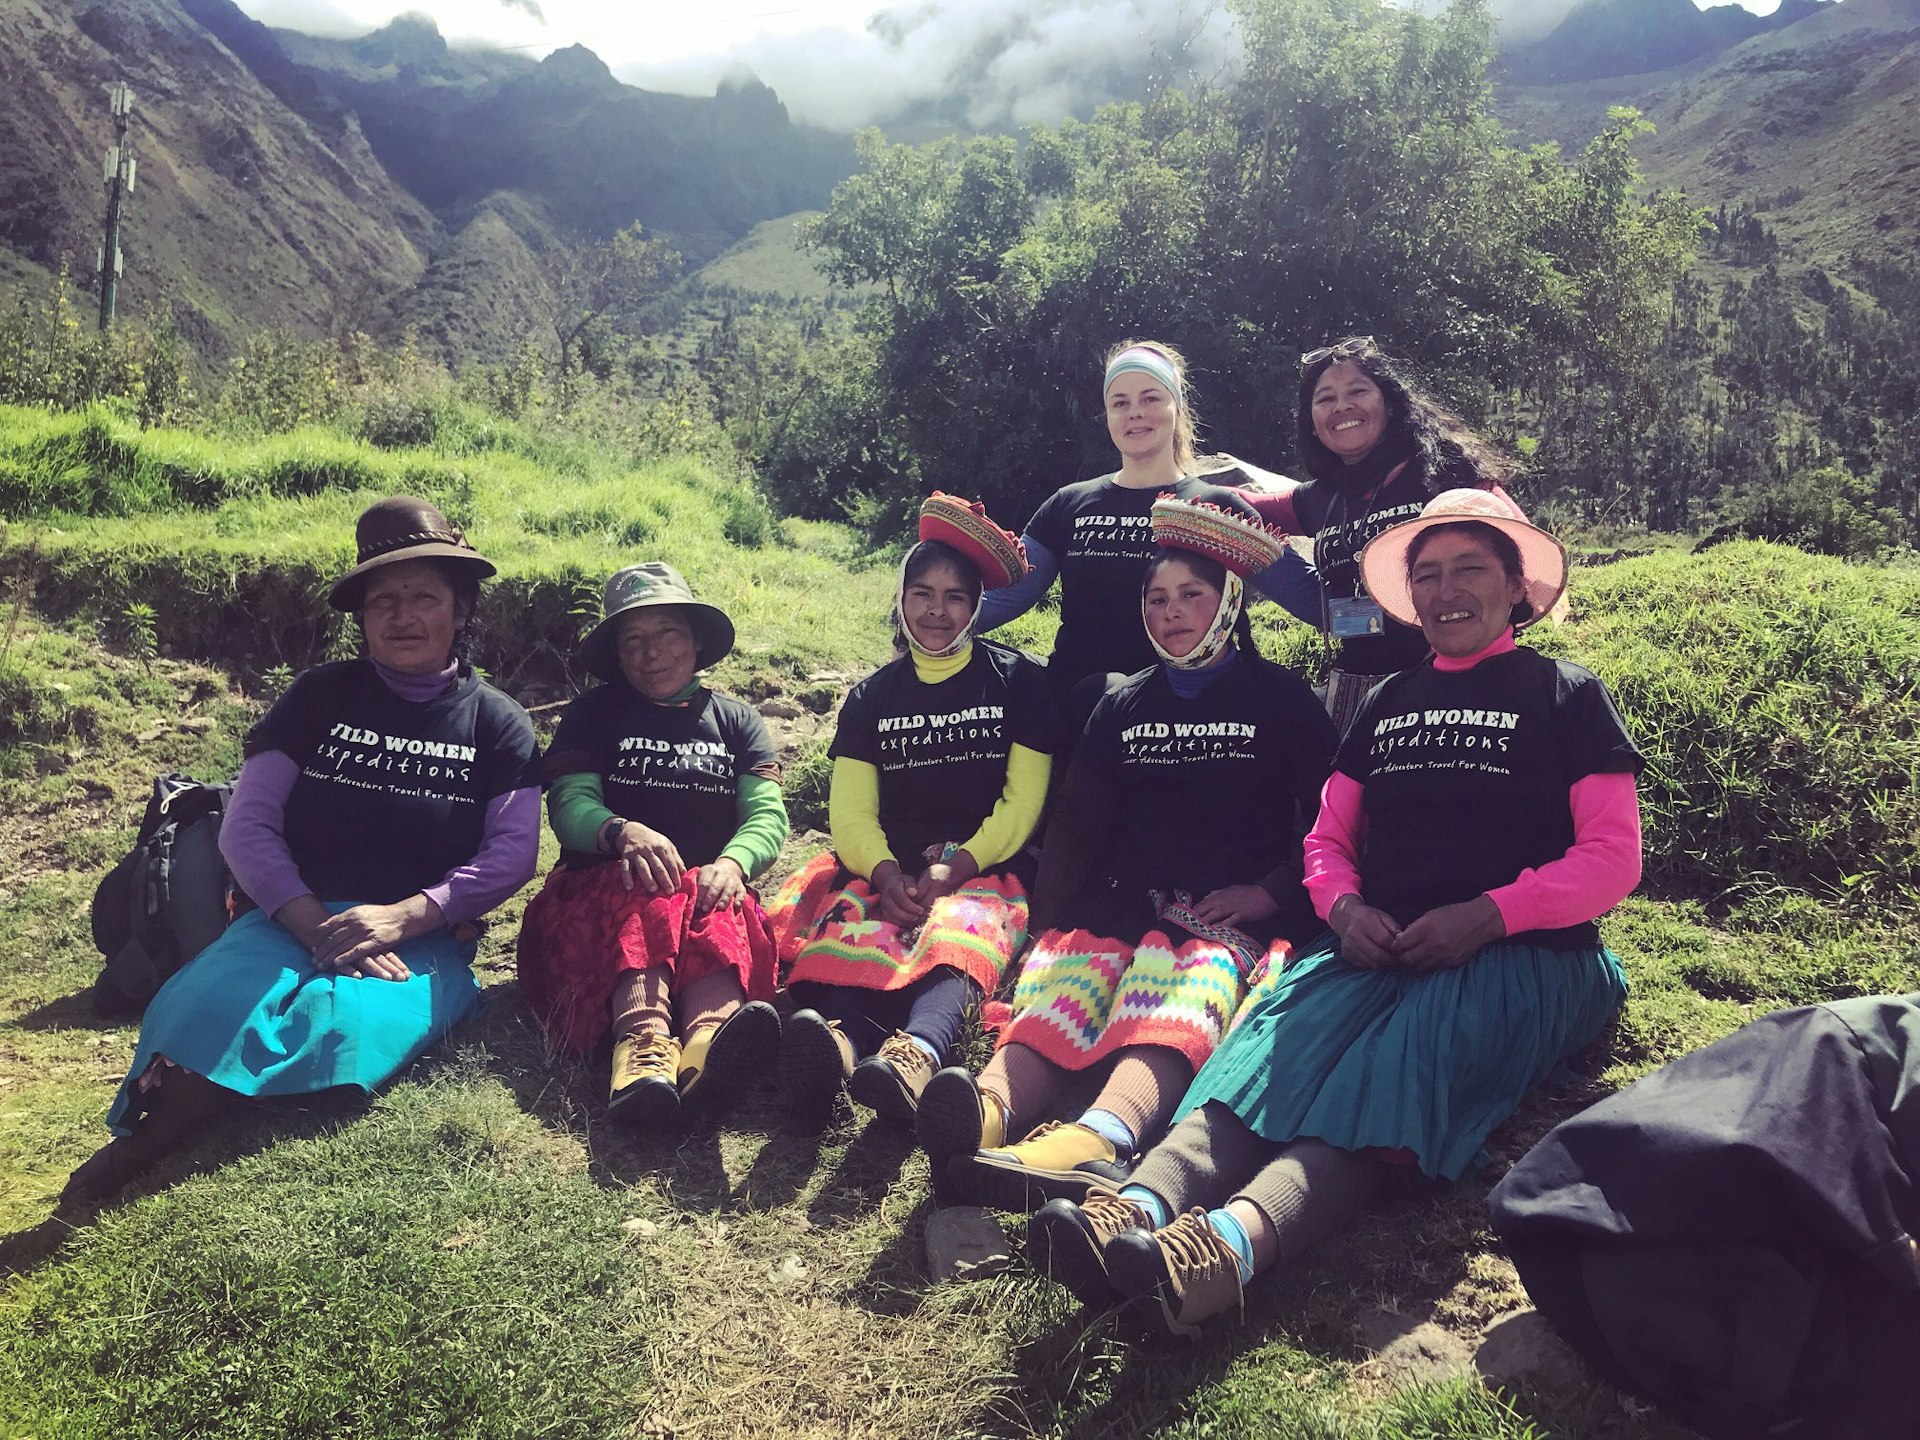 A group of female porters in Peru pose for the camera on a grassy hill along the Inca Trail. They are wearing black shirts that say 'Wild Women Expeditions' over their long skirts and long-sleeve shirts; women adventure travel 